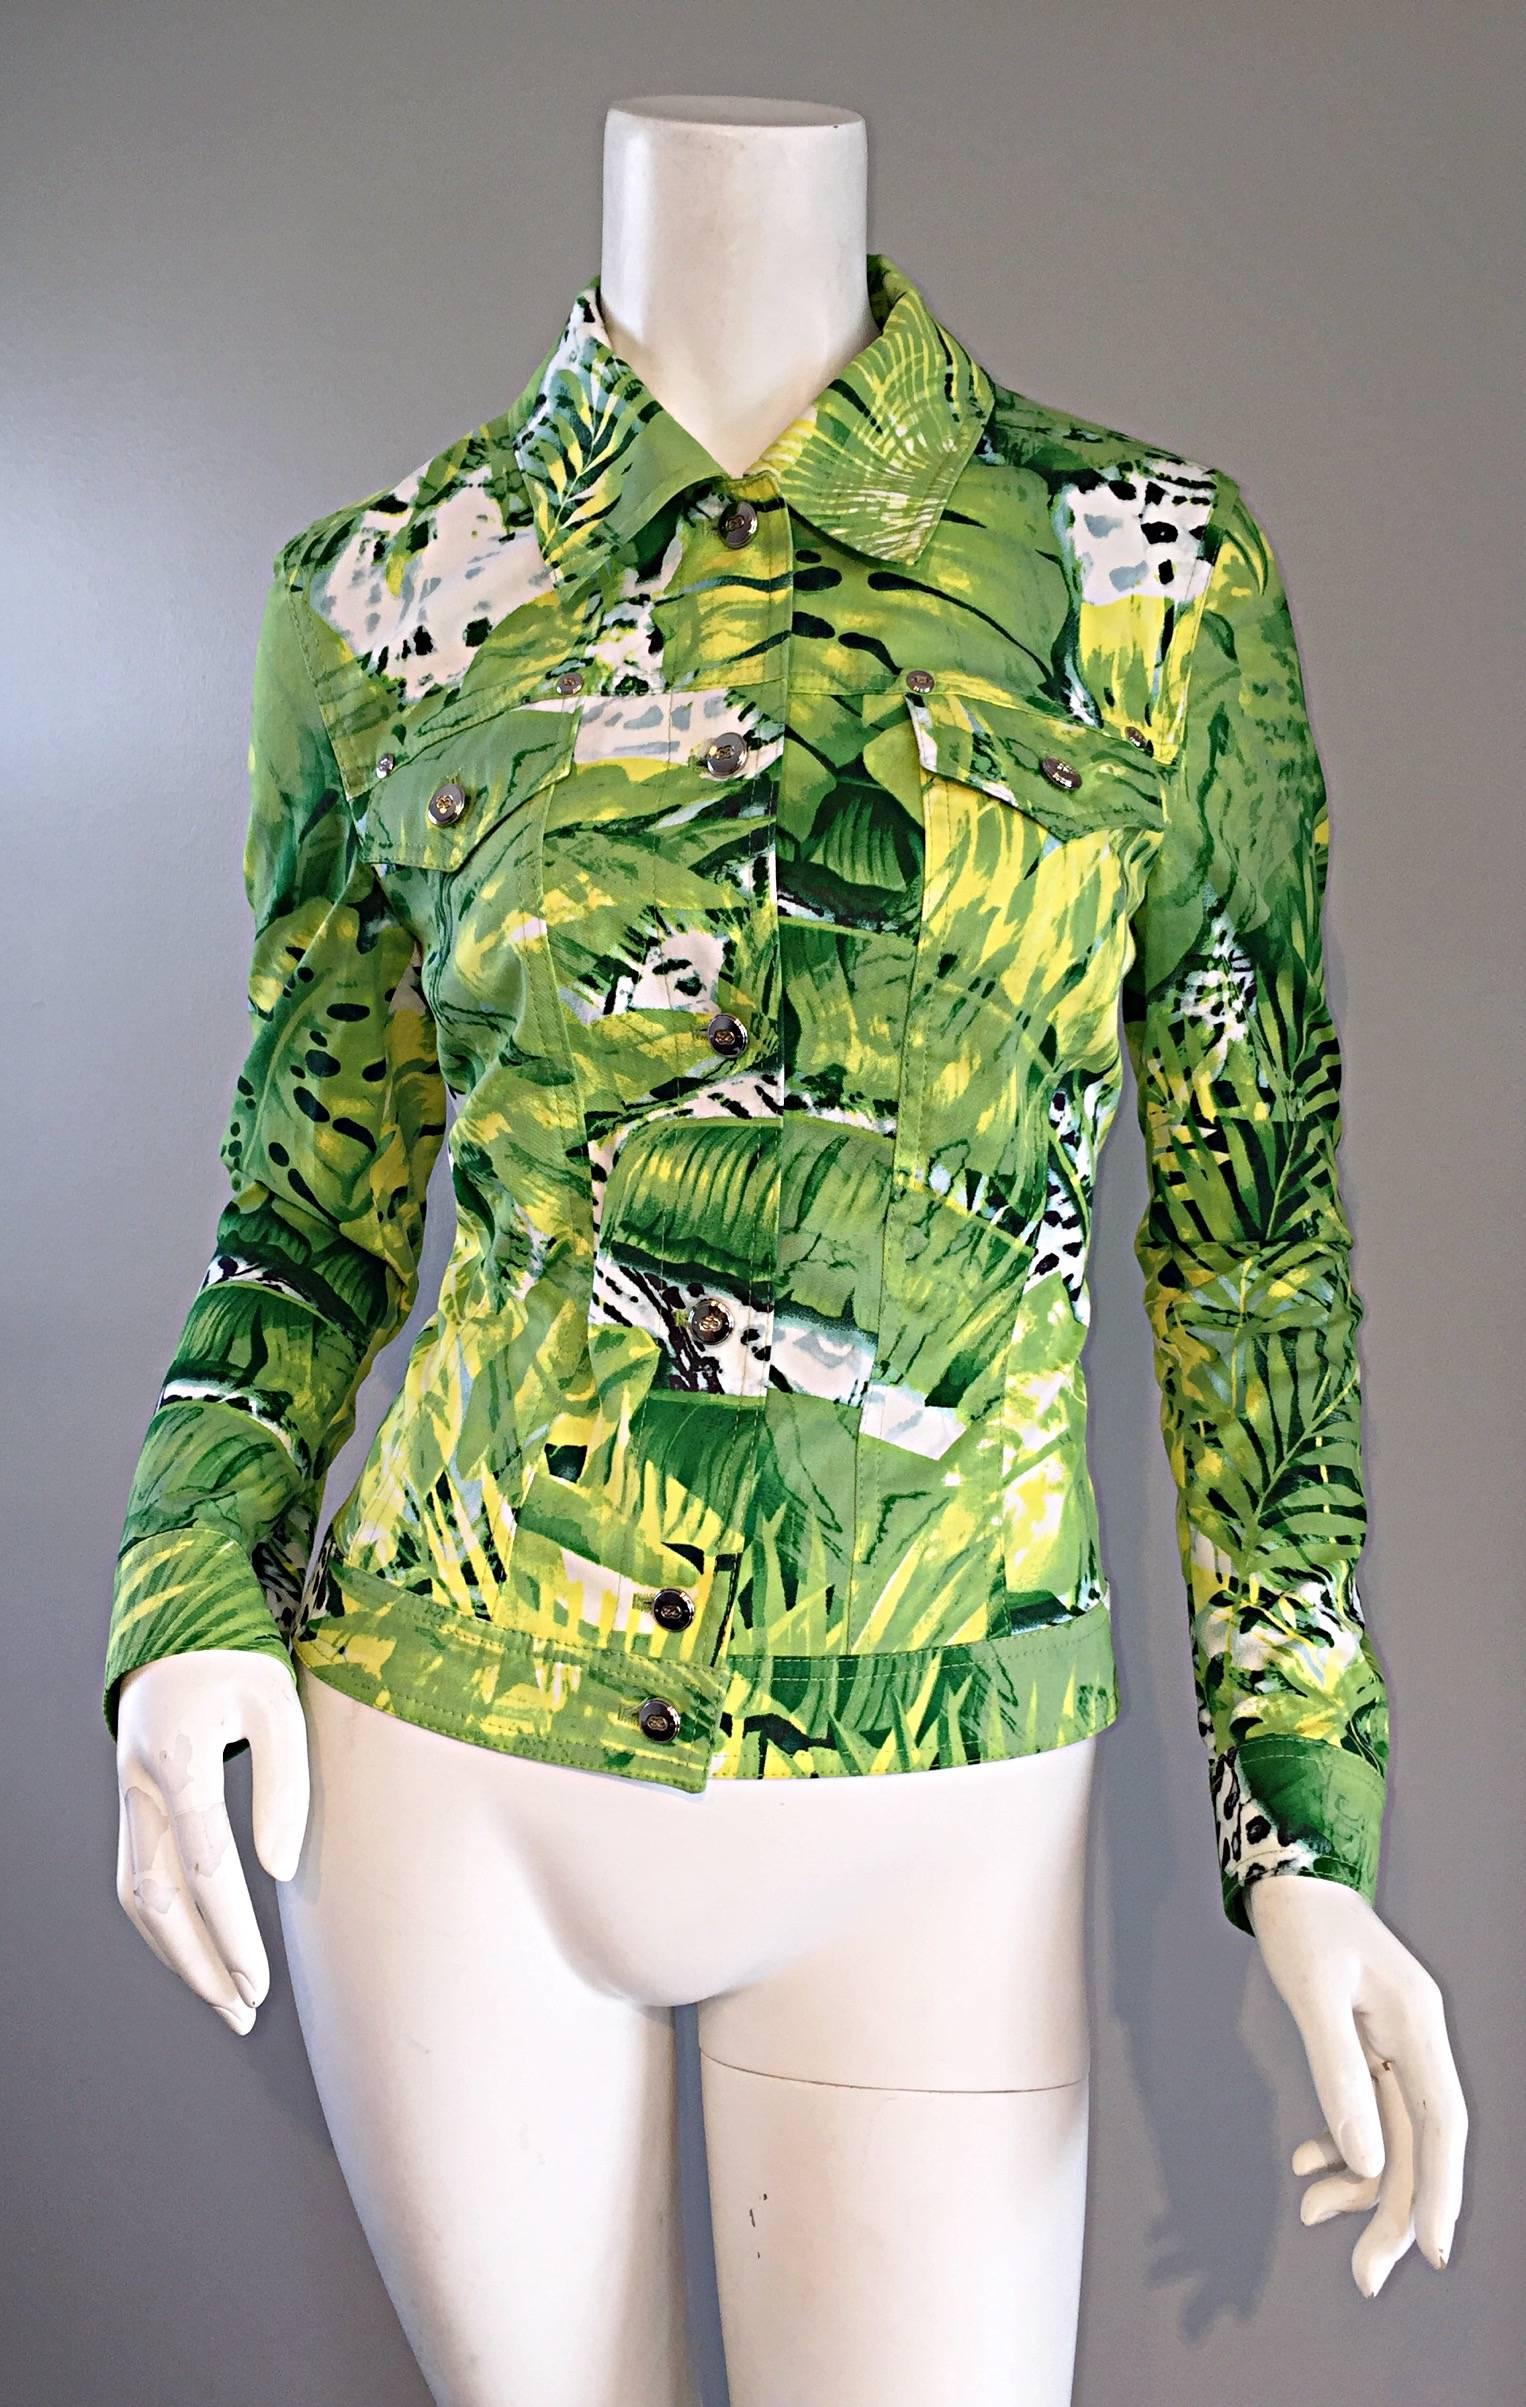 Amazing brand new ESCADA cotton jacket! Denim style, with banana leaves and palm trees printed throughout in vibrant hues of green. Silver buttons, embossed discreetly with the Escada logo, down the bodice, at each from breast pocket, and at each